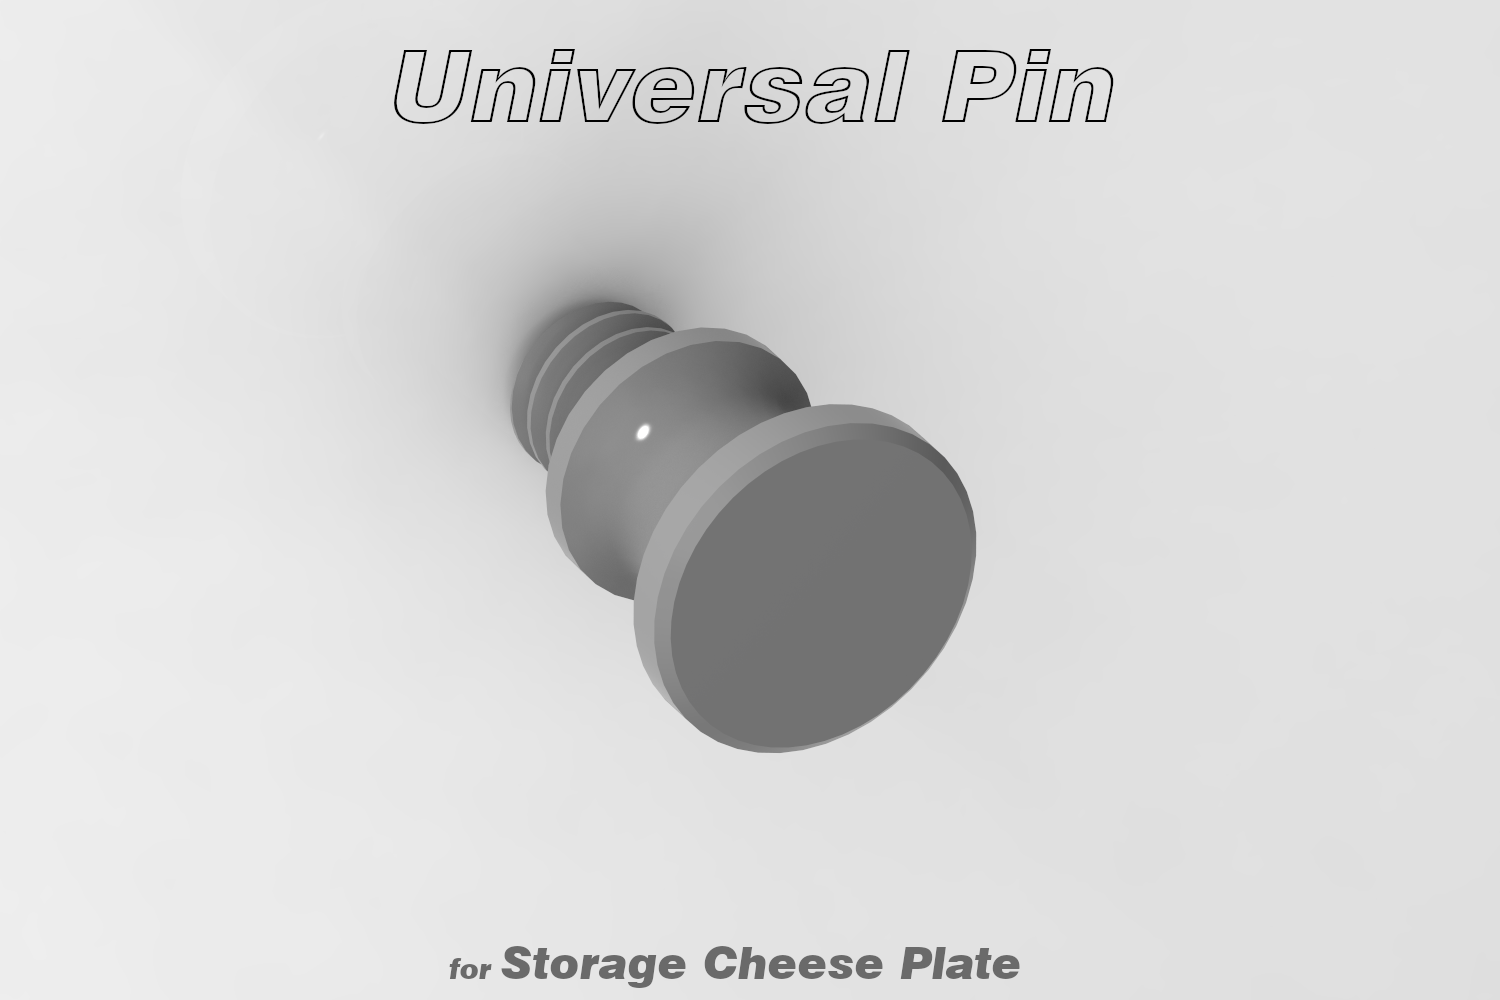 Universal Pin (for Storage Cheese Plate)